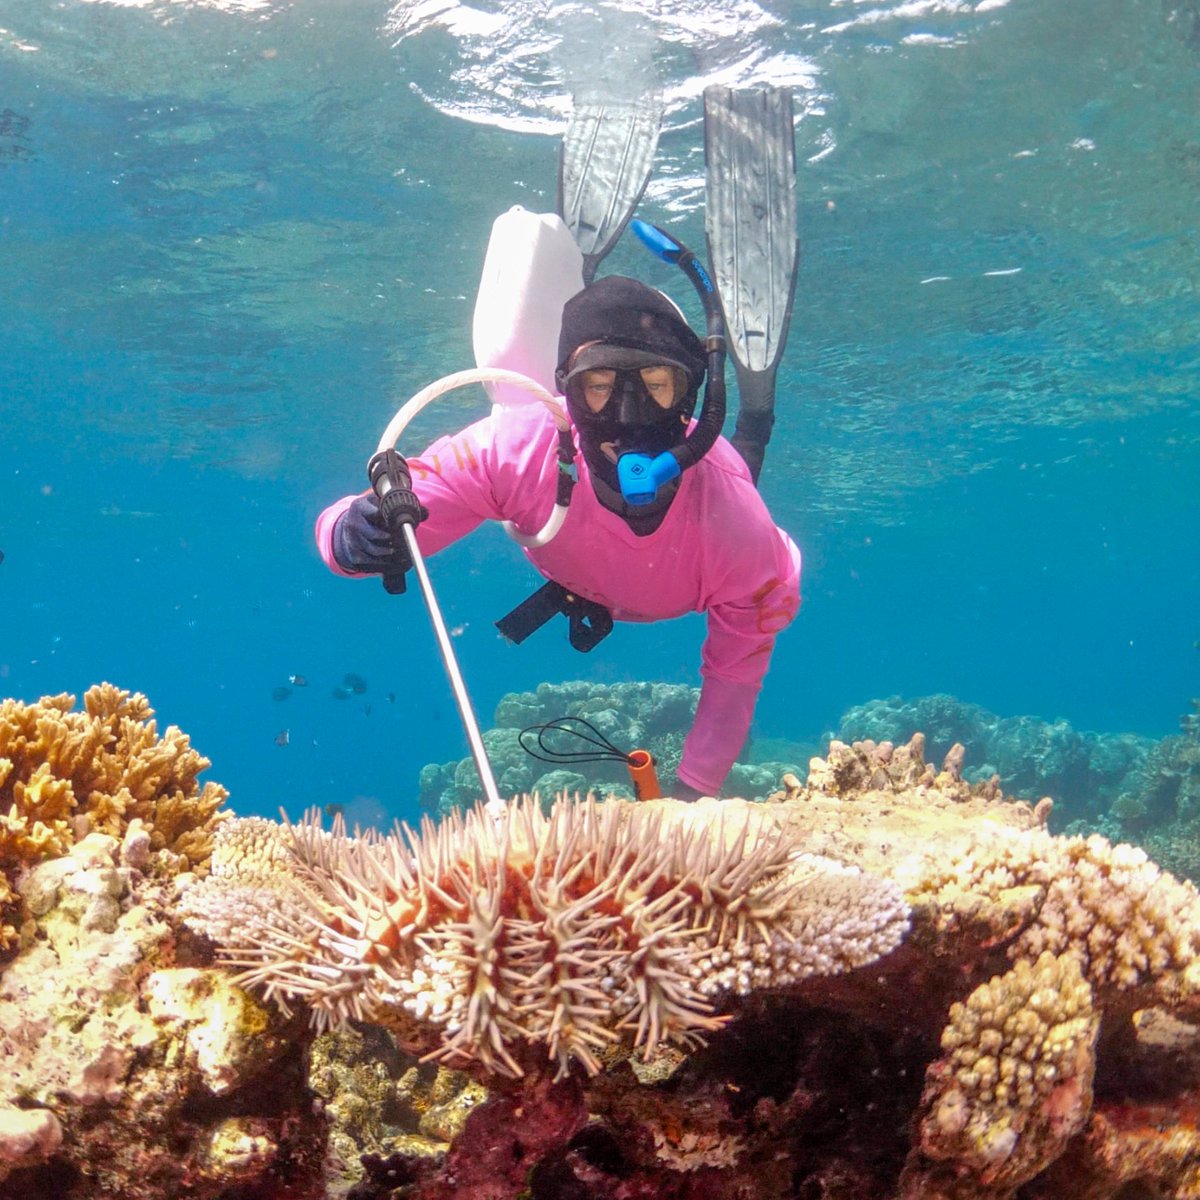 New study combines data from the Crown-of-thorns Starfish (COTS) Control Program + our Long-Term Monitoring Program (LTMP) to reveal benefits to coral cover when targeted culling of starfish occurs. LTMP have monitored COTS & coral cover for decades. 🔗bit.ly/3weddOU